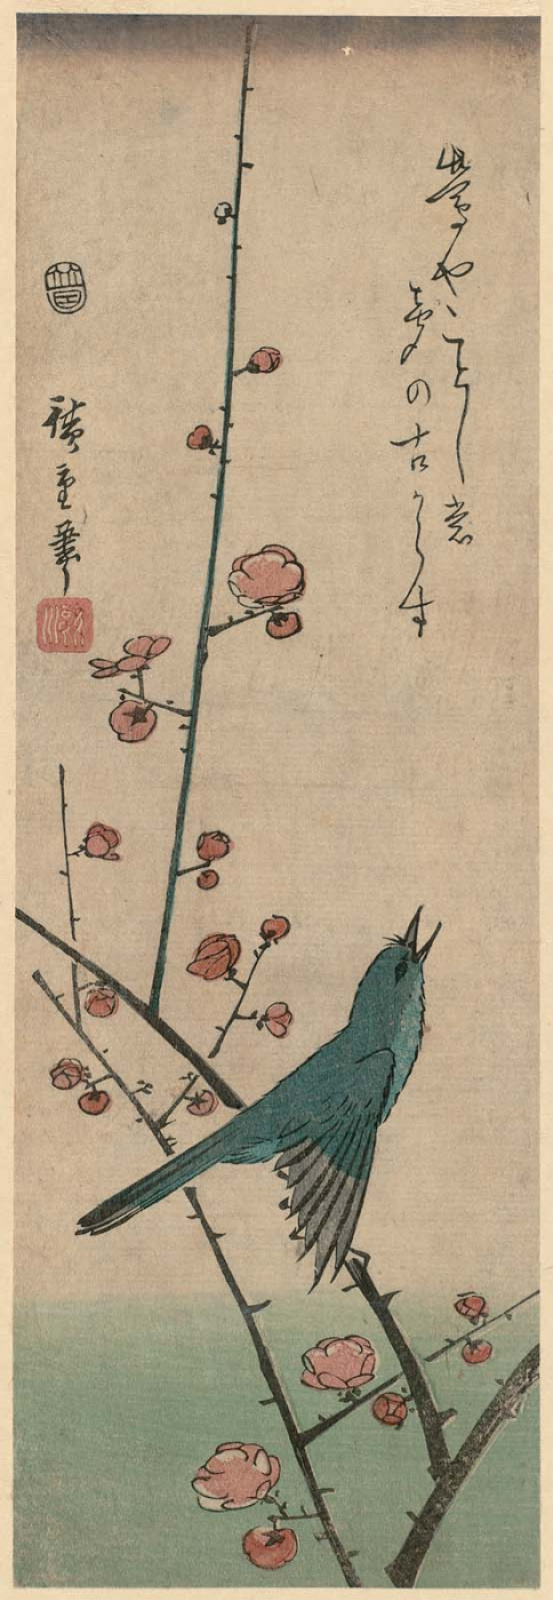 Utagawa Hiroshige. The Warbler on a blossoming branch. Series "Birds and flowers"